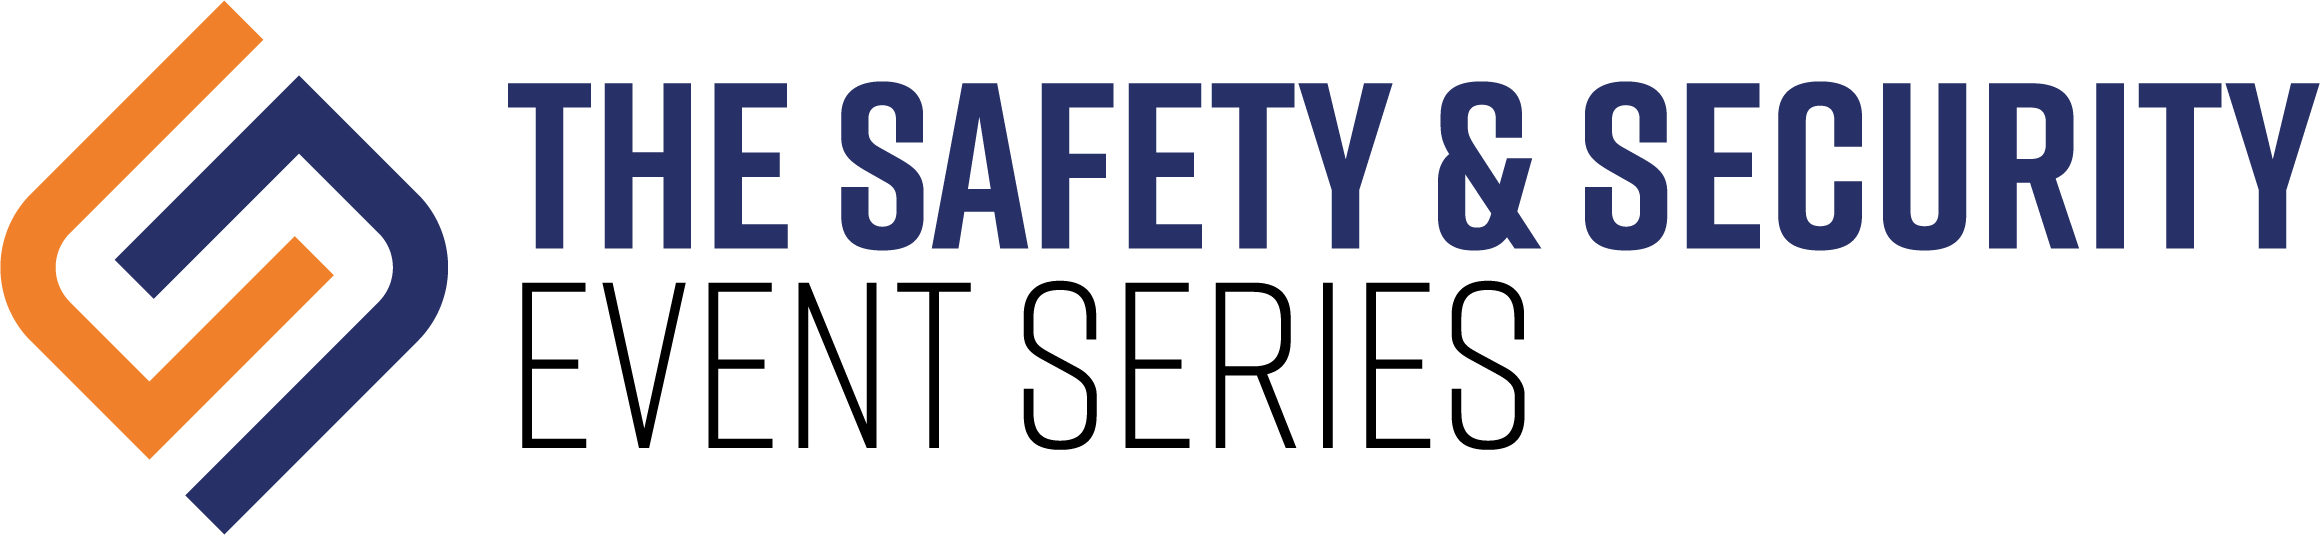 The Safety & Security Event Series